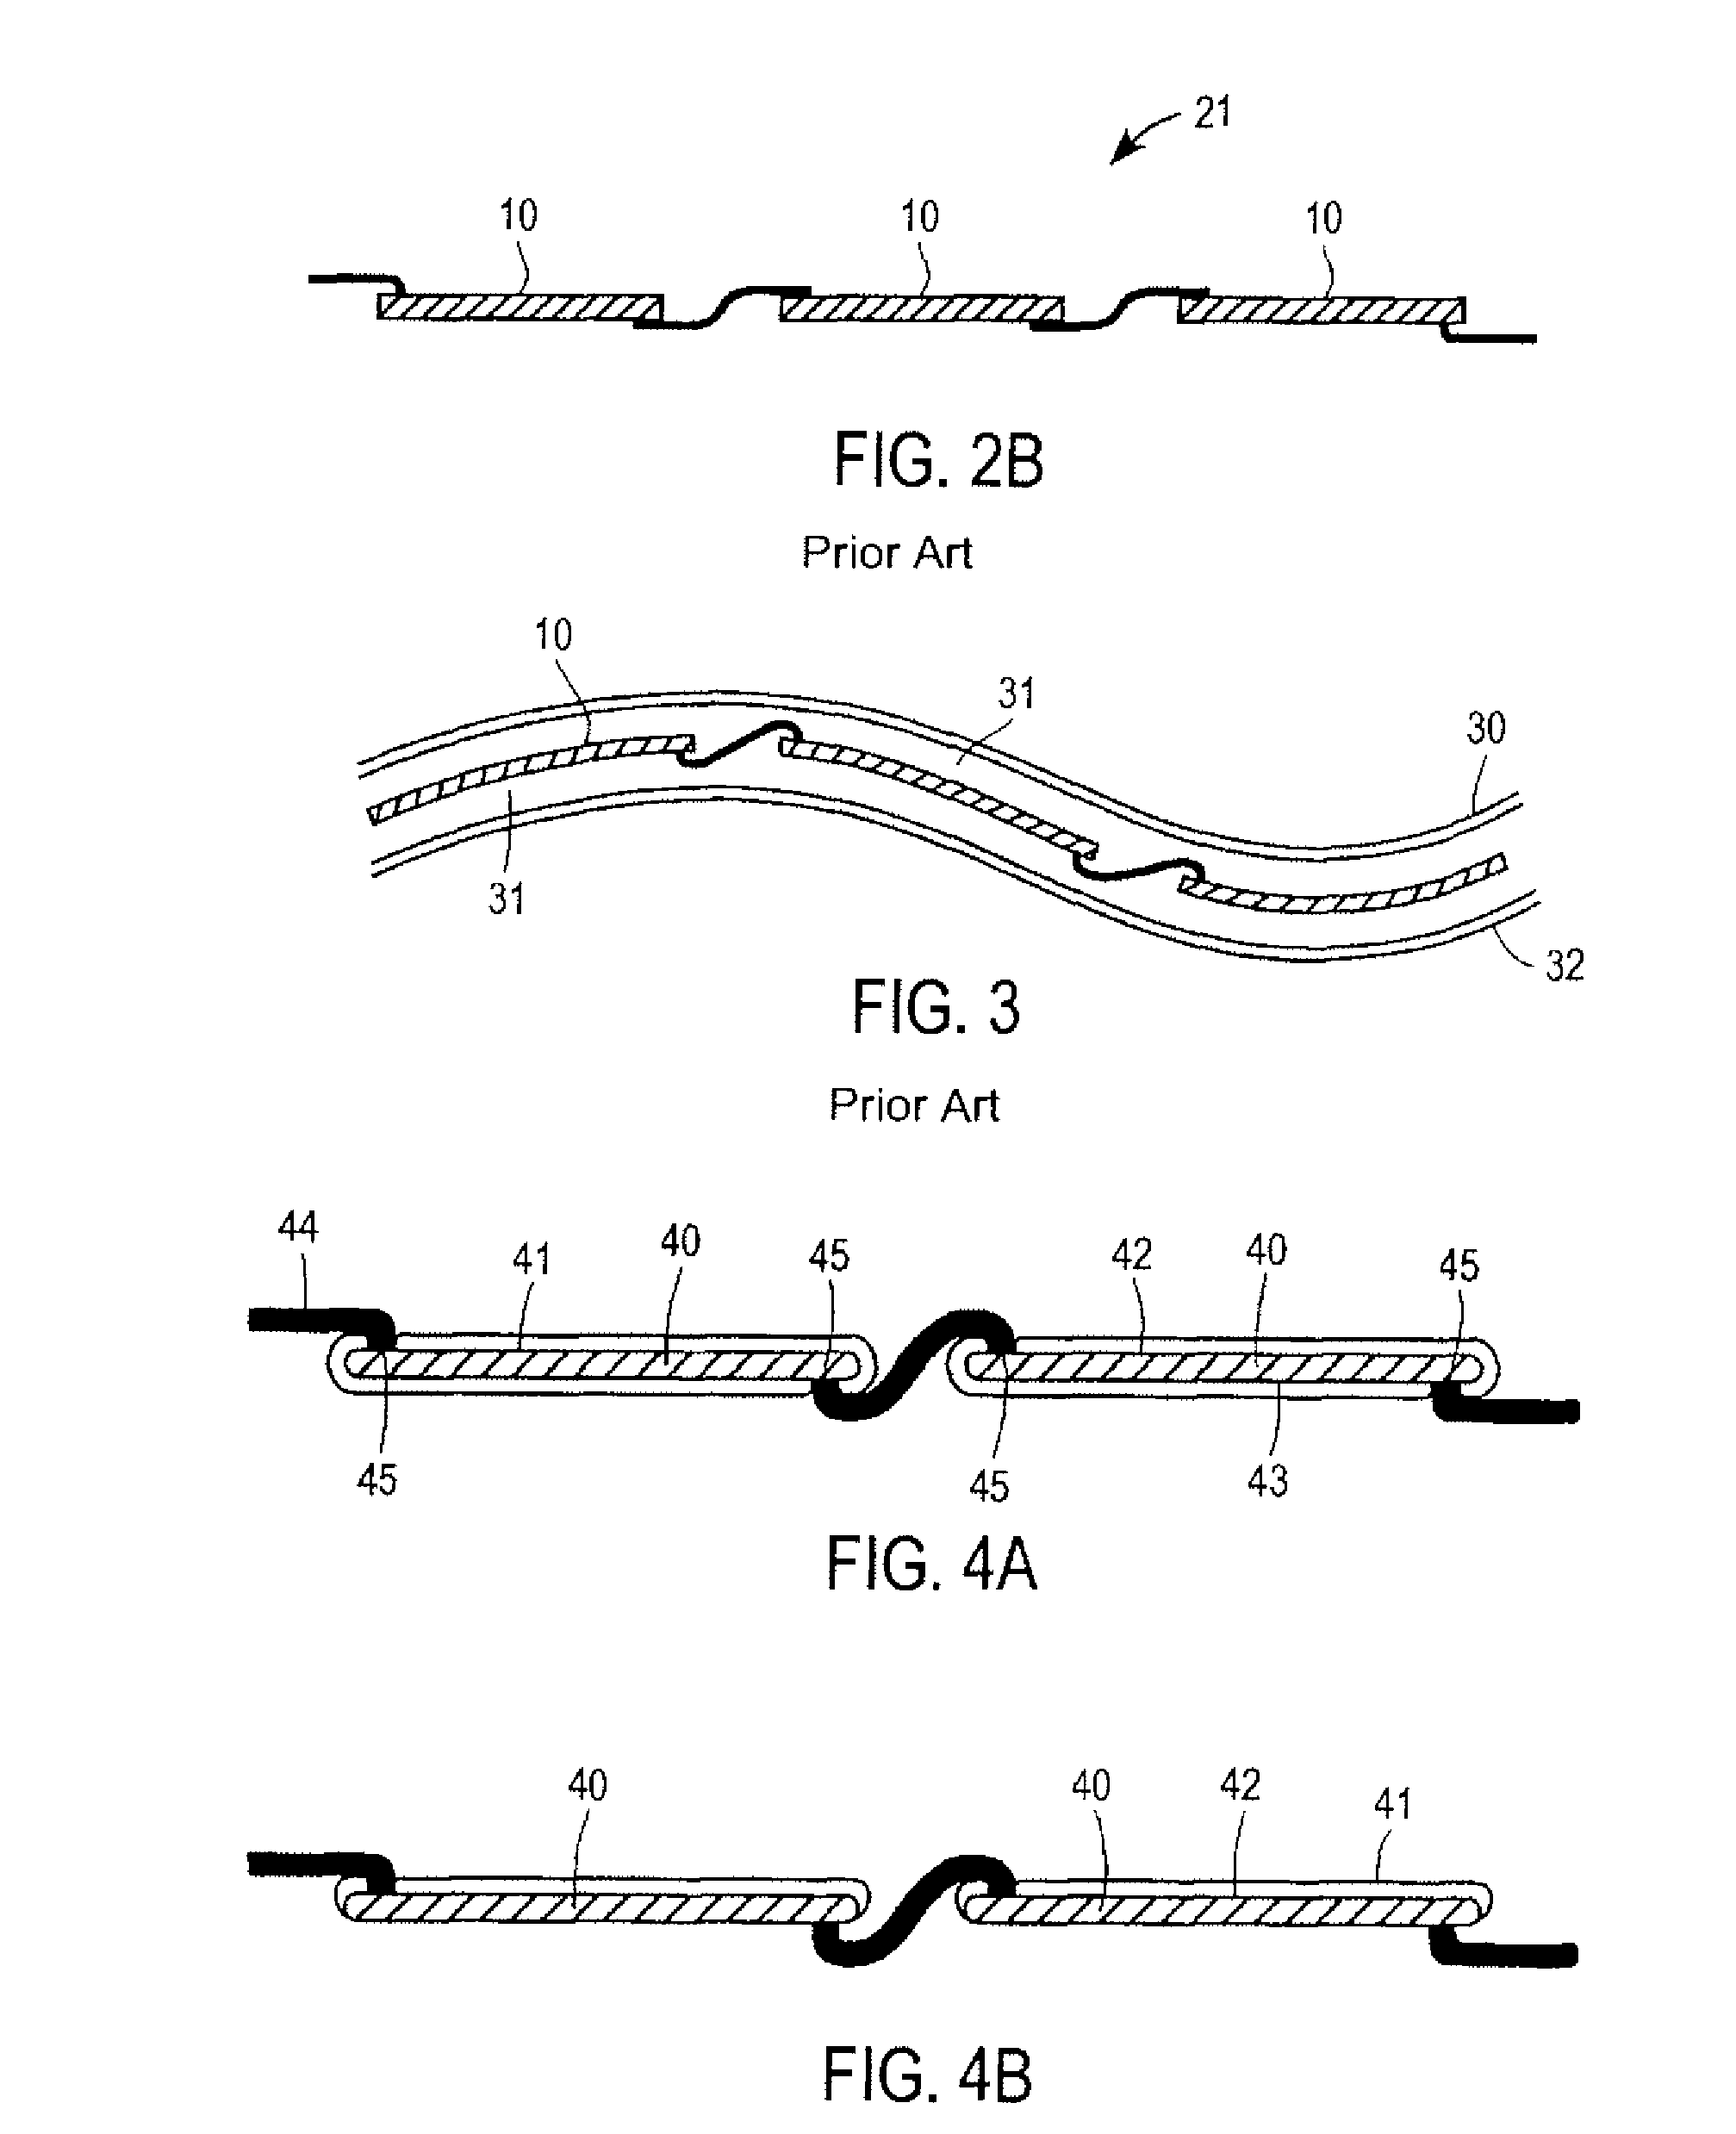 Technique and apparatus for manufacturing flexible and moisture resistive photovoltaic modules